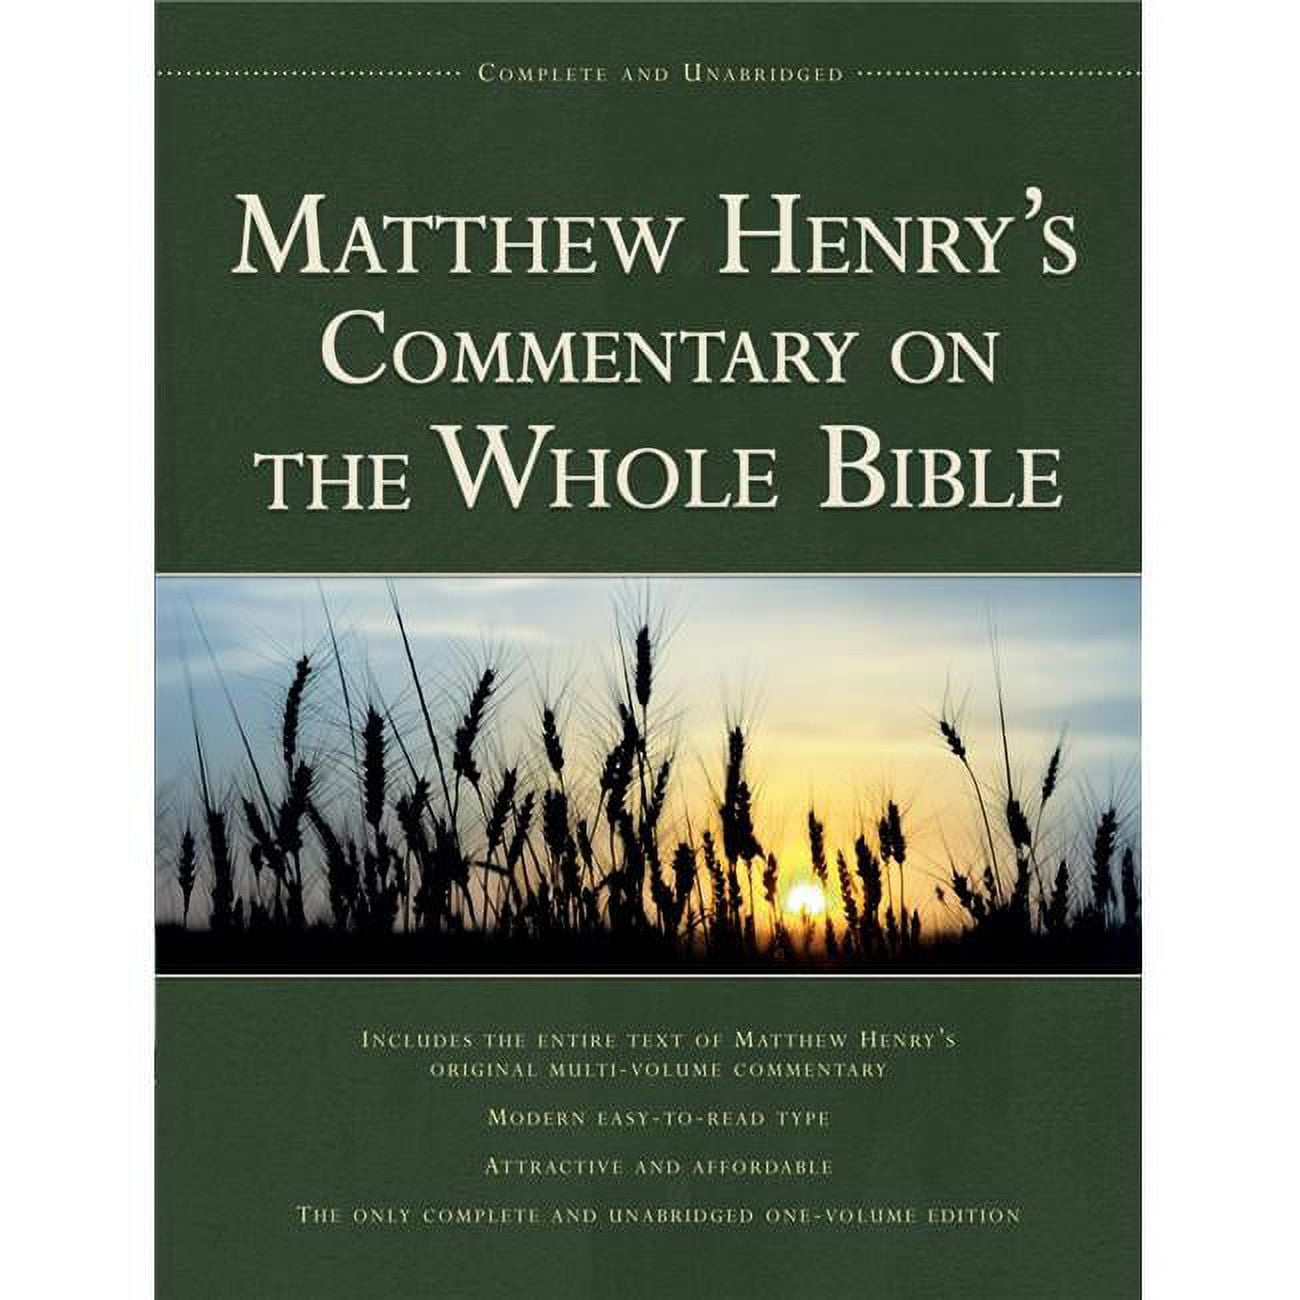 108599 Matthew Henrys Commentary On The Whole Bible - Complete & Unabridged